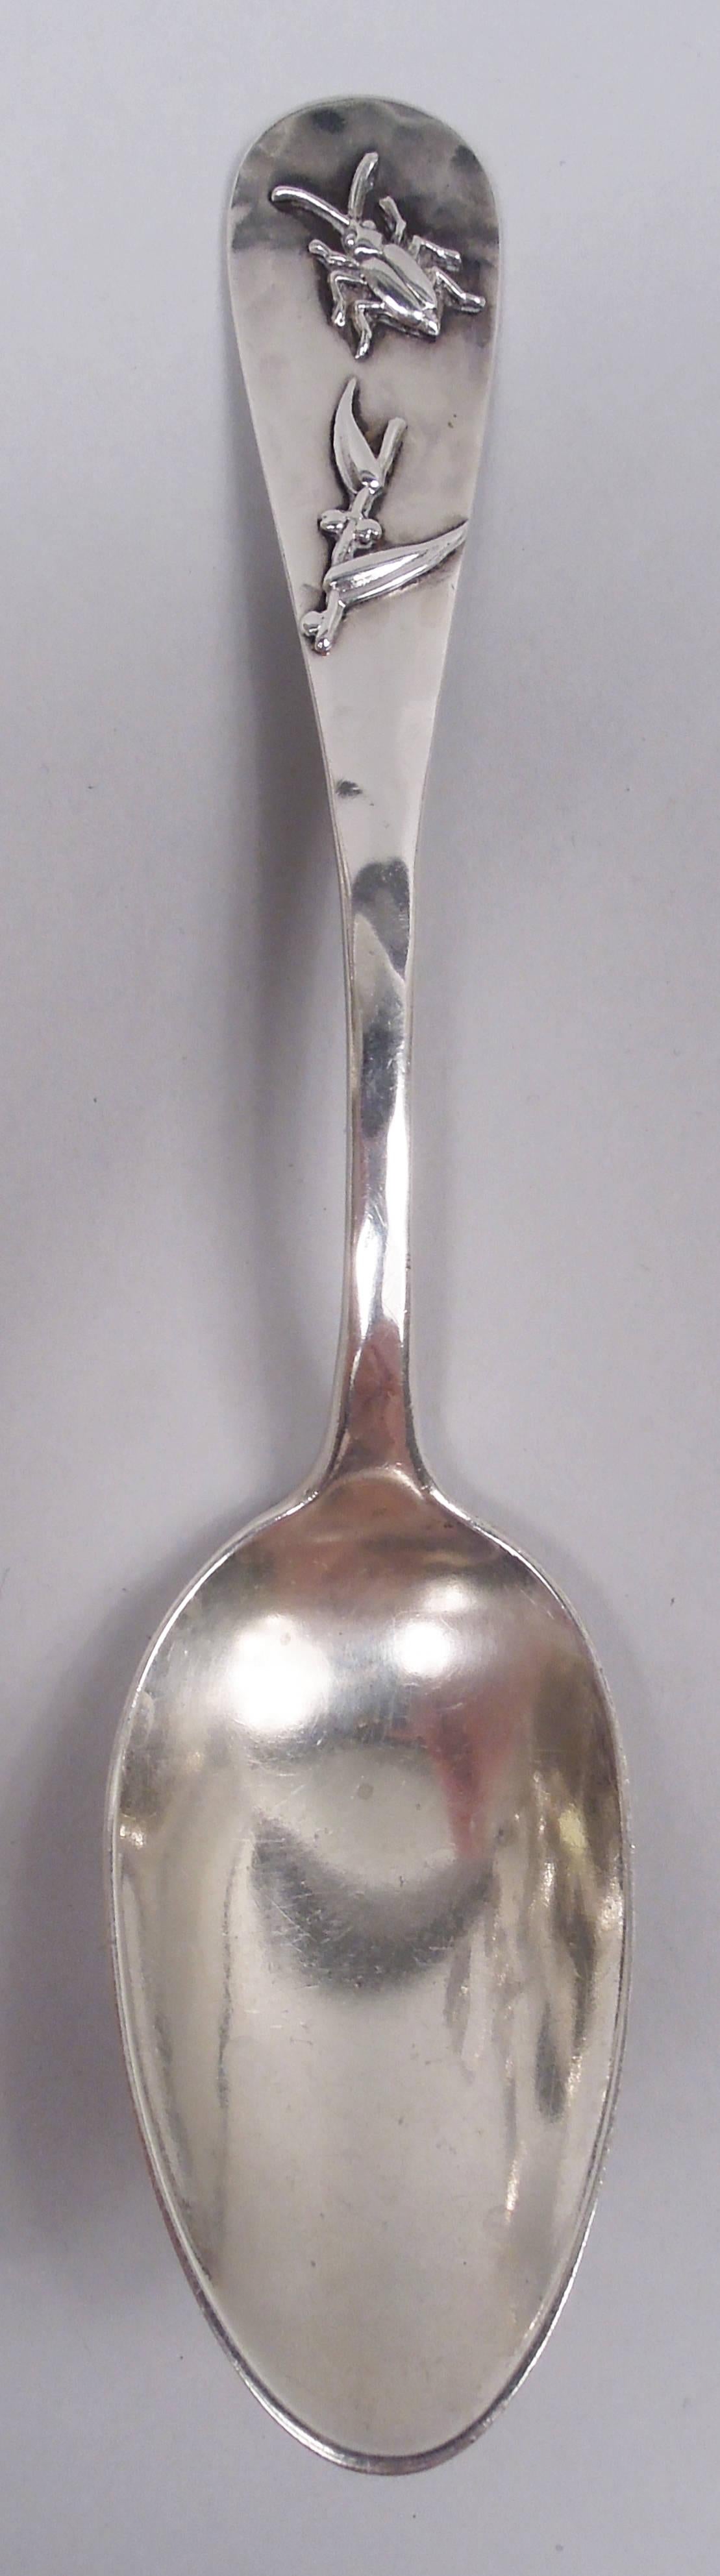 Japonesque sterling silver spoon. Made by George W. Shiebler & Co. in New York, ca 1885. Tapering stem and round terminal; front hand-hammered and applied with a bug and bit of bamboo. Oval bowl. Back plain. Fully marked including maker’s and